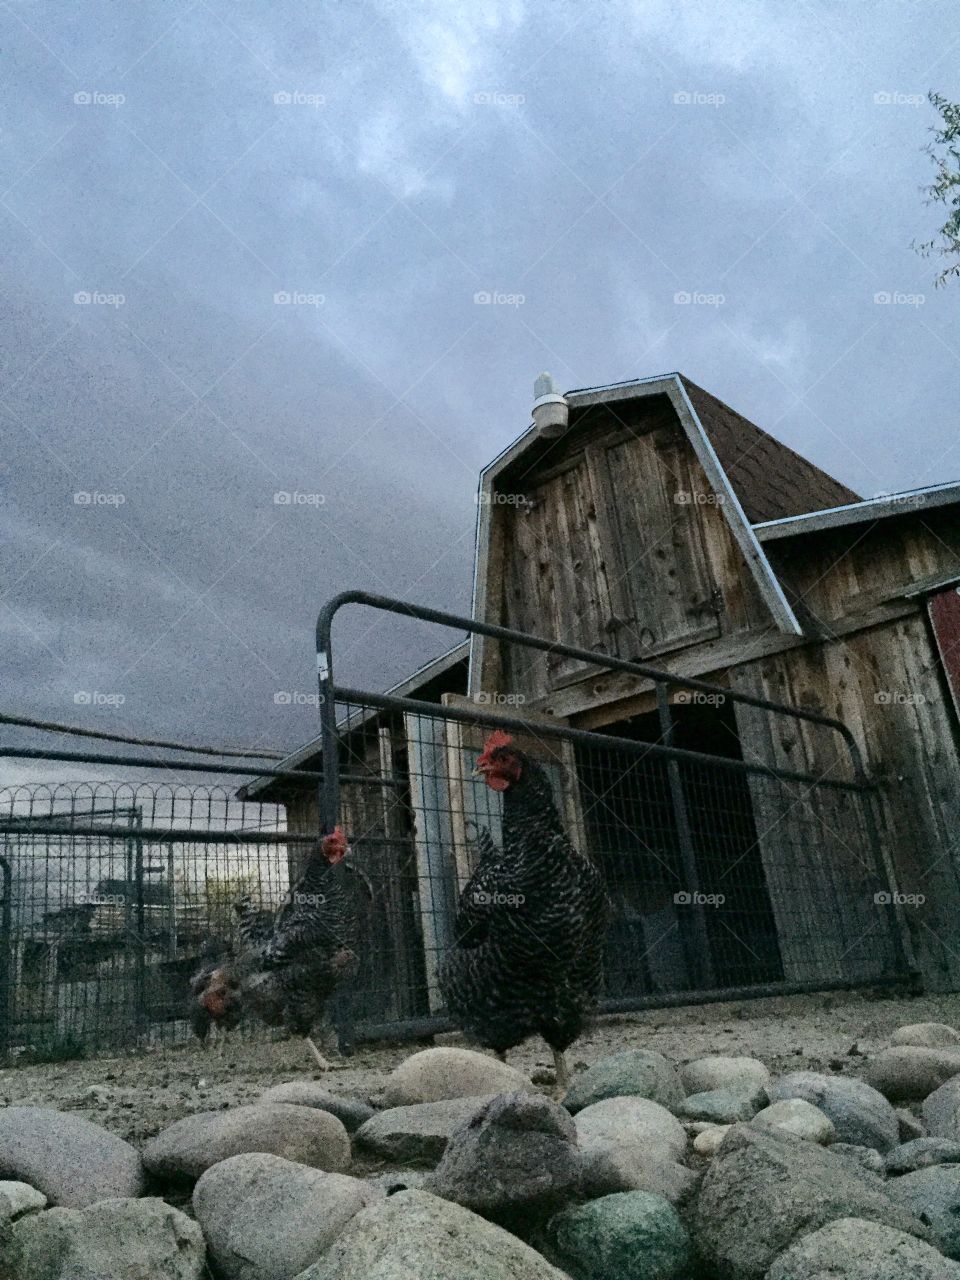 The Sky is Falling. Storm clouds build over a barn in rural Wyoming as chickens keep watch